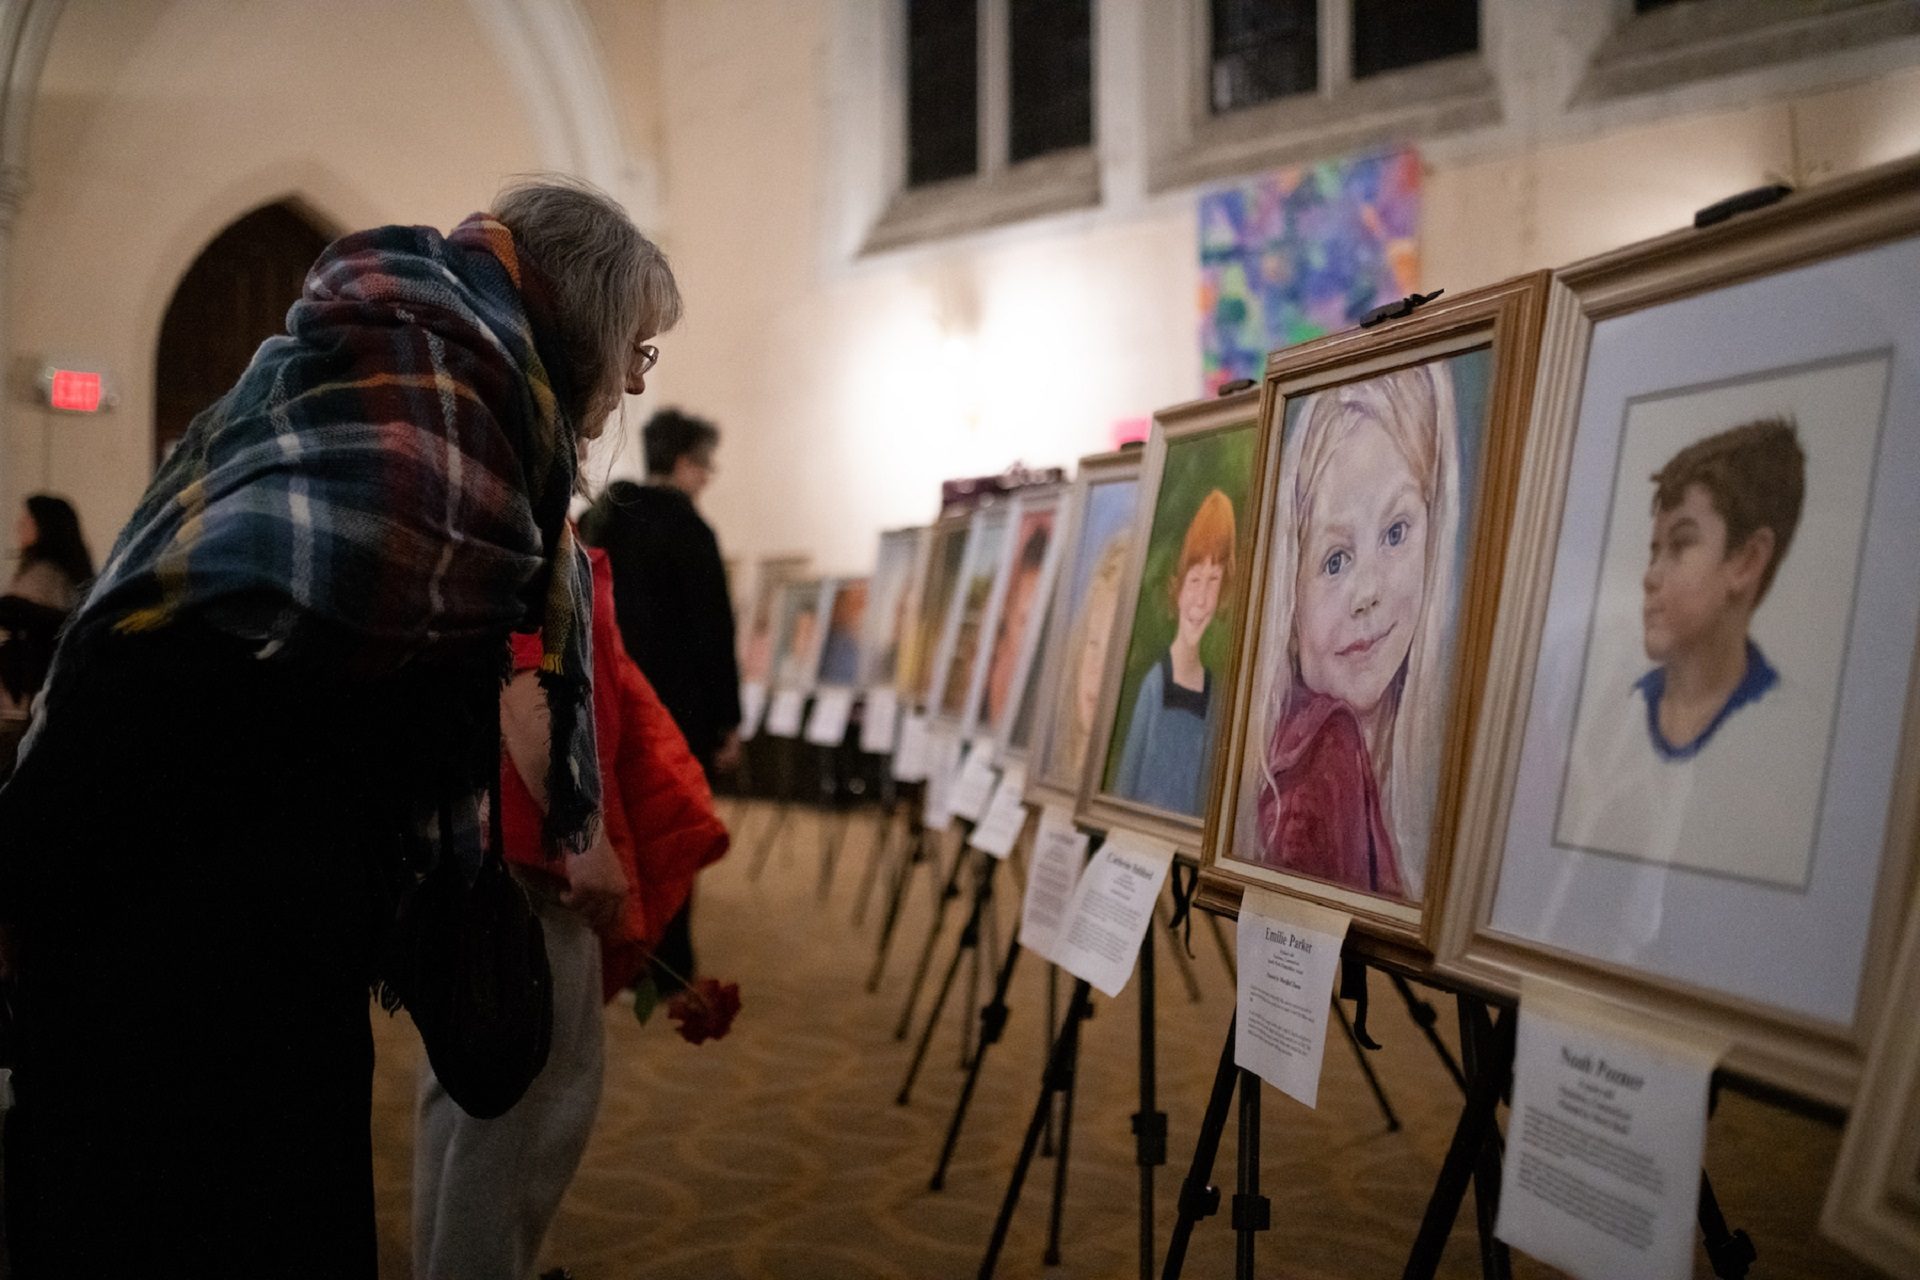 Mourners gathered to remember gun violence victims view portraits of children killed in the Sandy Hook mass shooting following a vigil held at Broad Street Ministry on Wednesday, December 11, 2019. The portraits were created by Lost Dreams on Canvas, an organization that memorials gun violence victims through art.